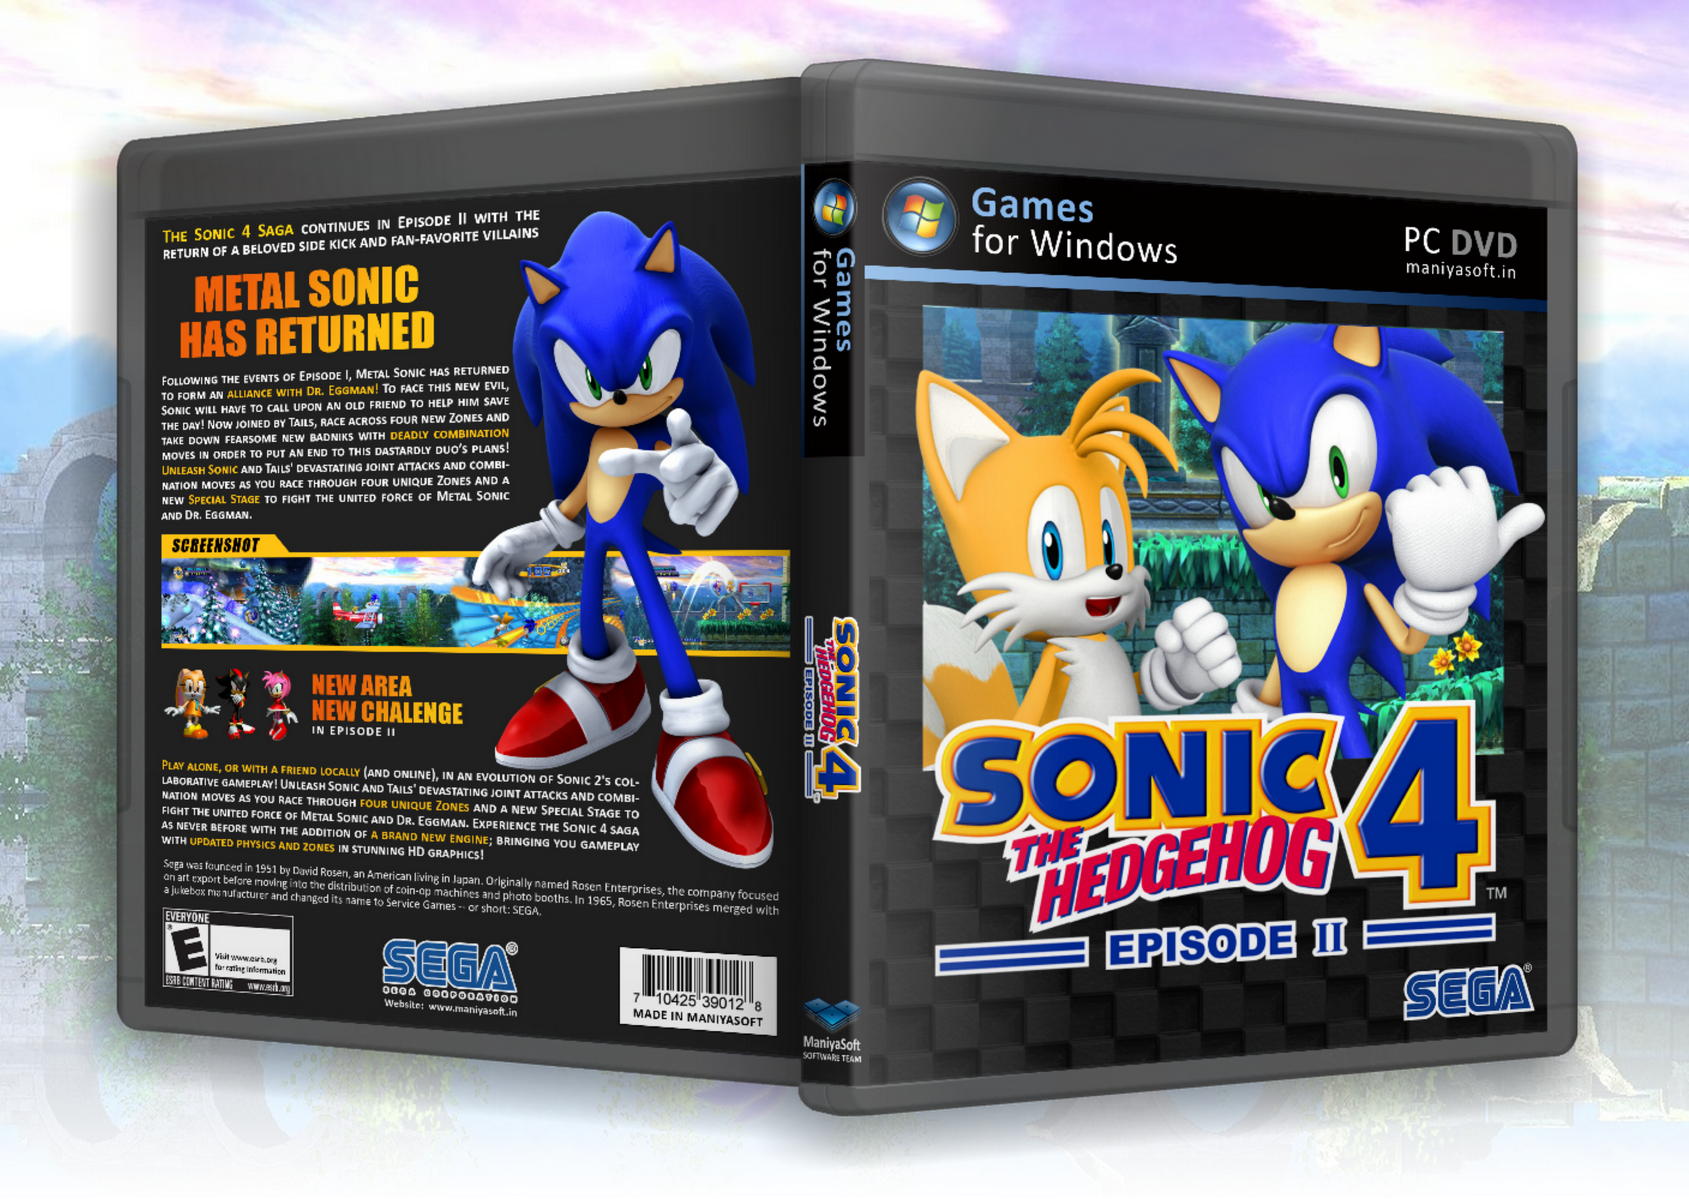 Sonic the Hedgehog 4: Episode II box cover